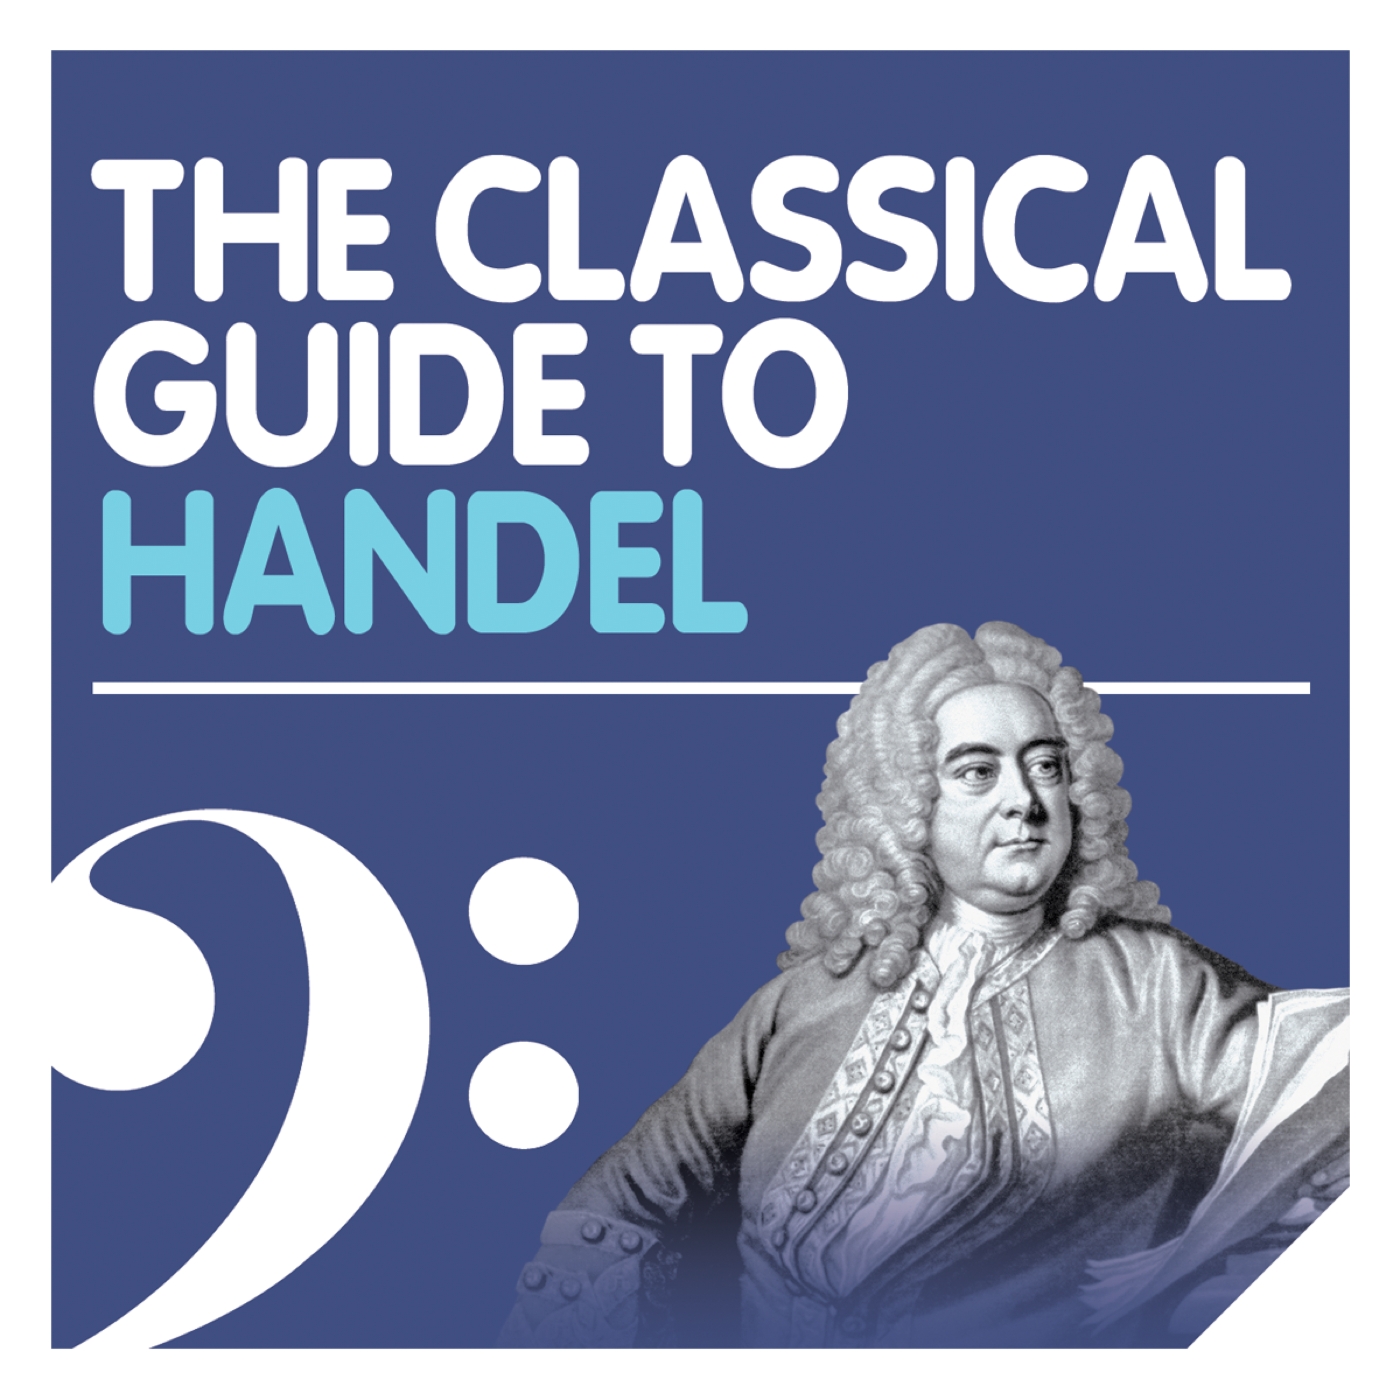 The Classical Guide to Handel